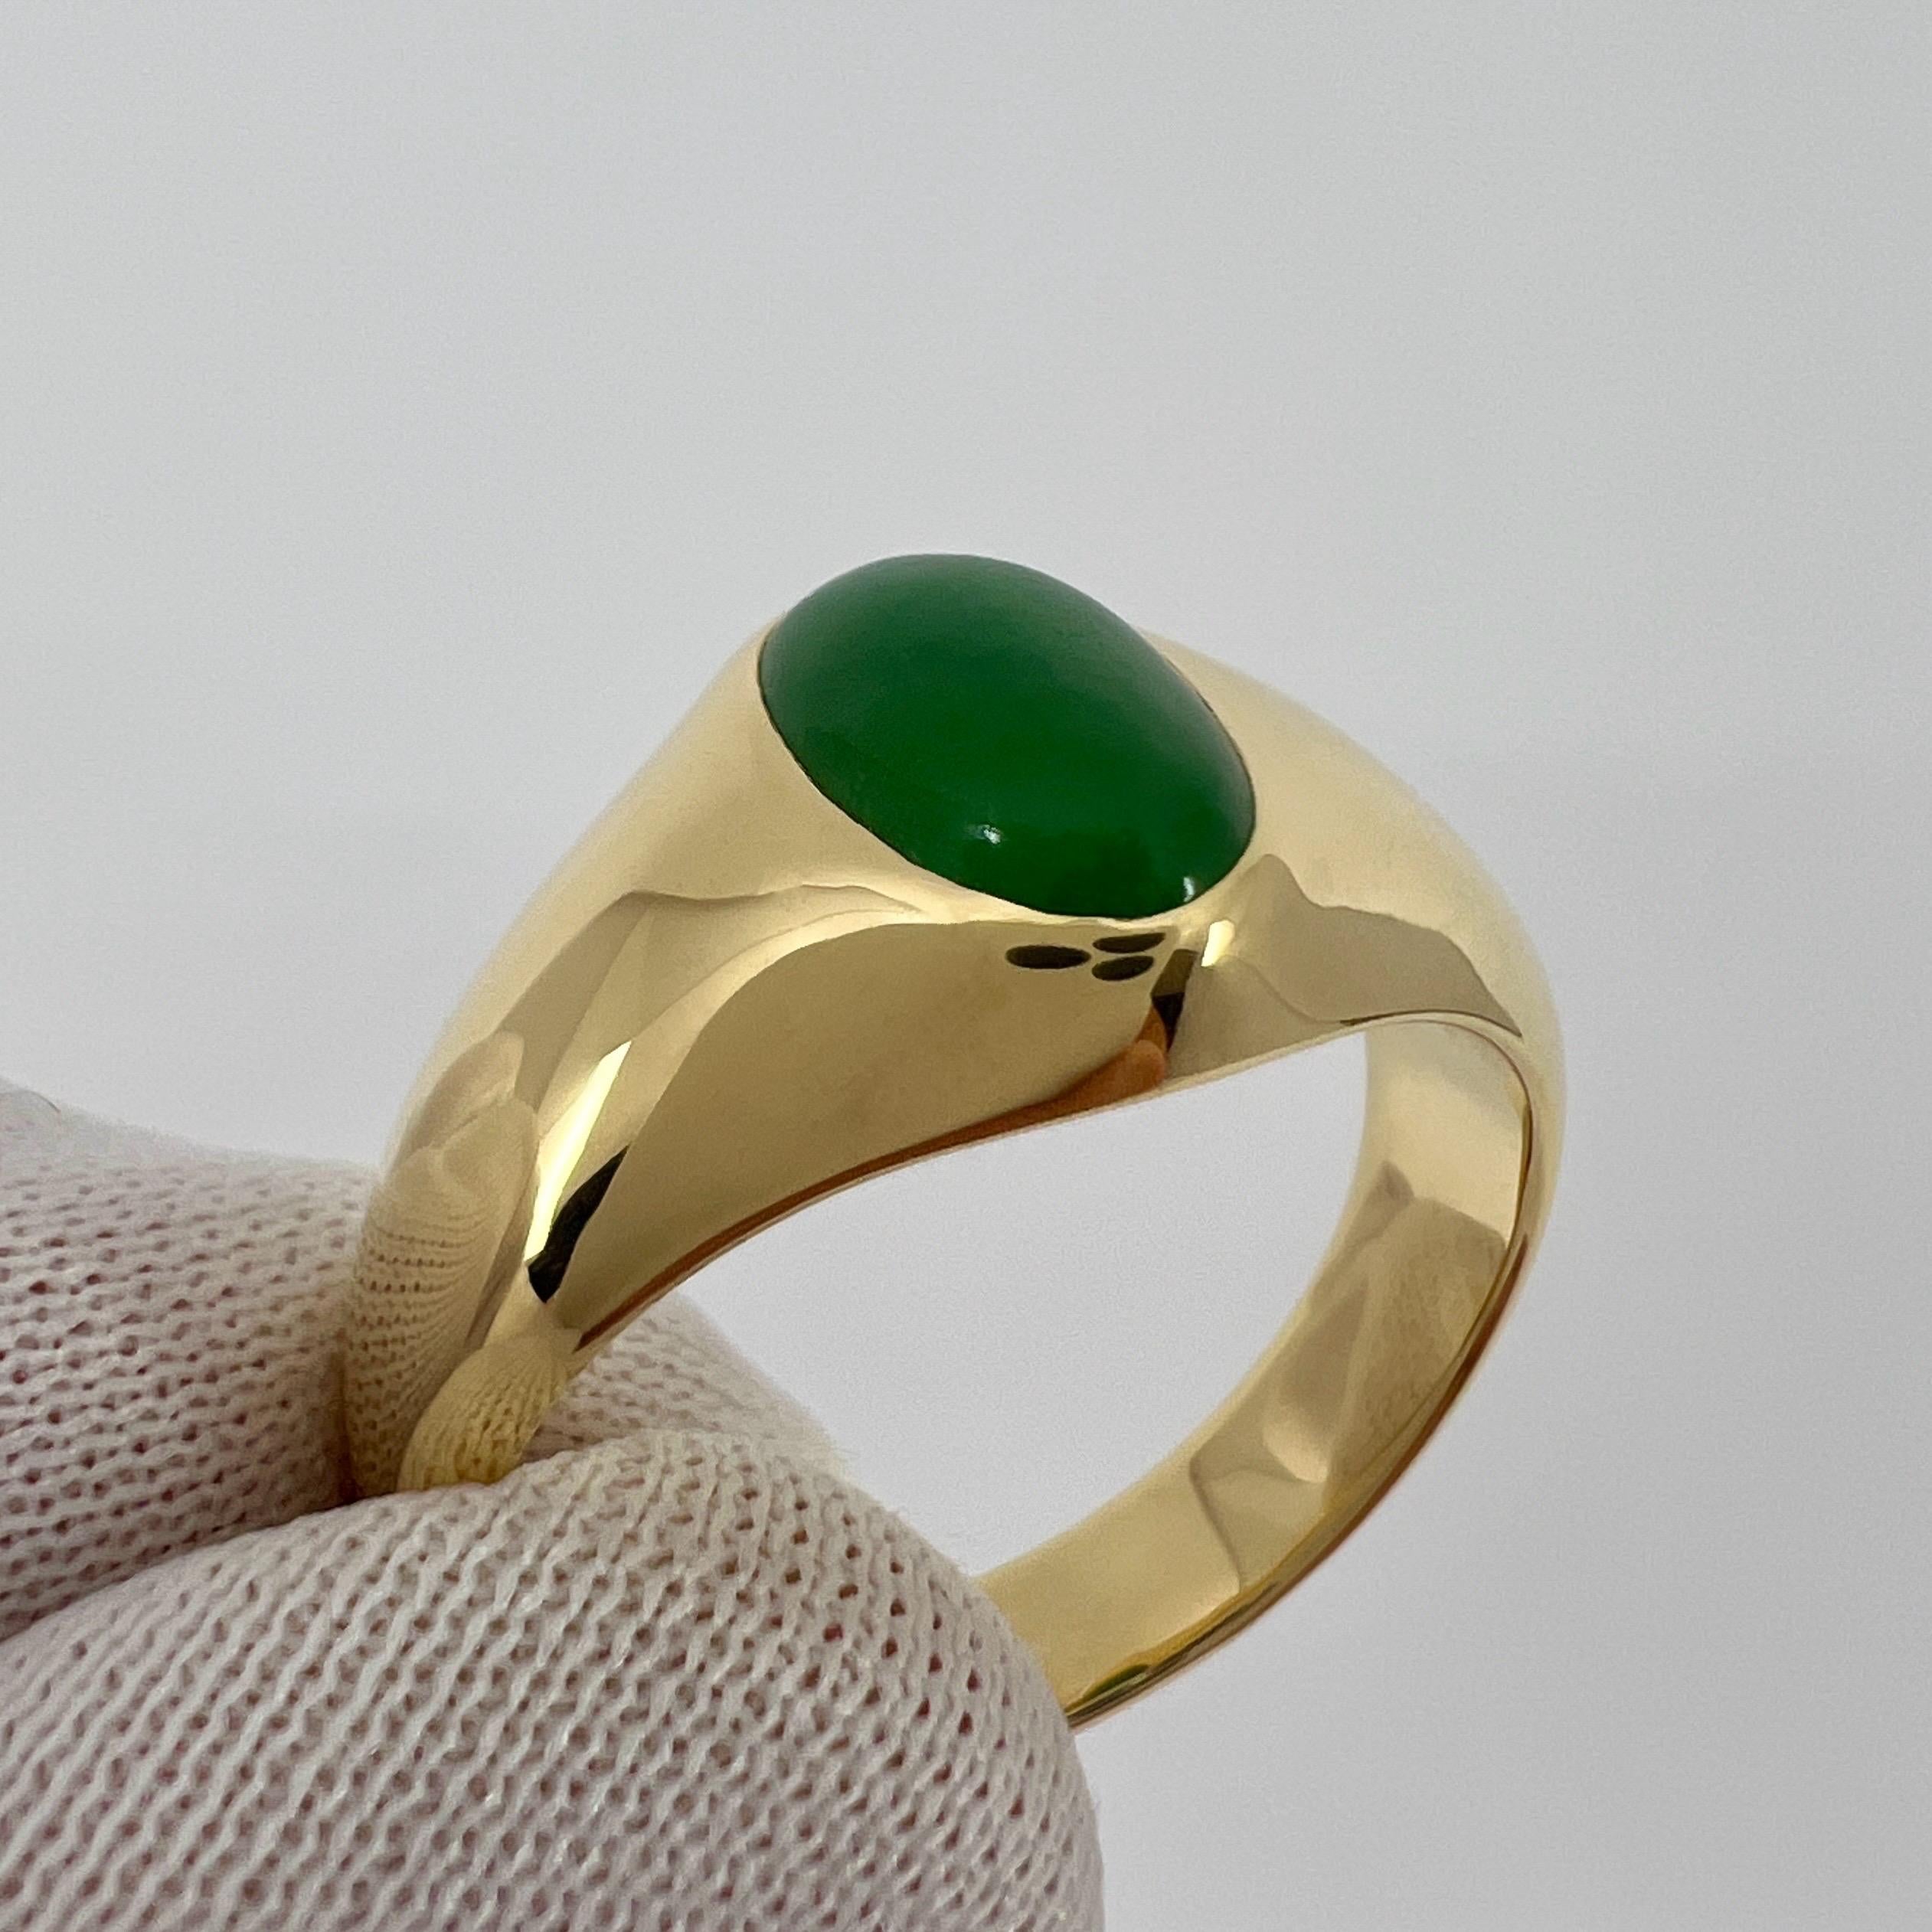 GIA Certified Jadeite A Grade Jade Oval Untreated 18k Yellow Gold Signet Ring 4